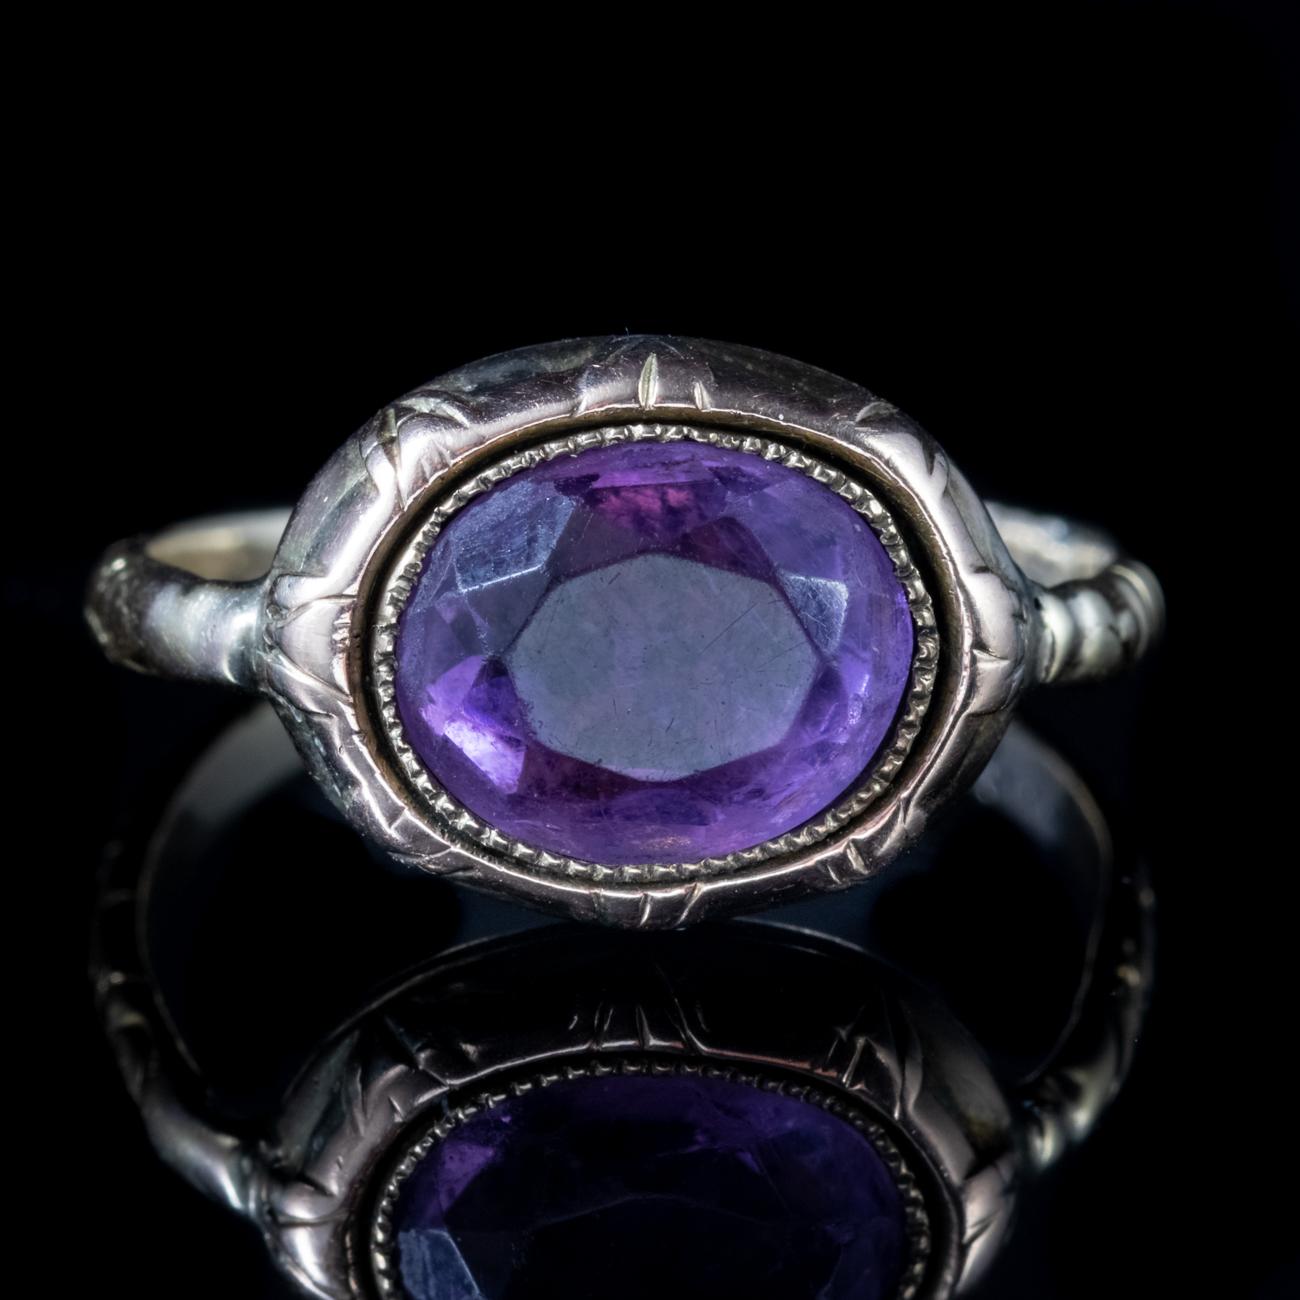 This stunning Antique Georgian ring, known as a Bishop’s Ring, is modelled in 18ct Yellow Gold and features a beautiful central Amethyst weighing 3ct. Both the gallery and the shank also feature beautiful engraving all around.

A Bishop’s Ring is a